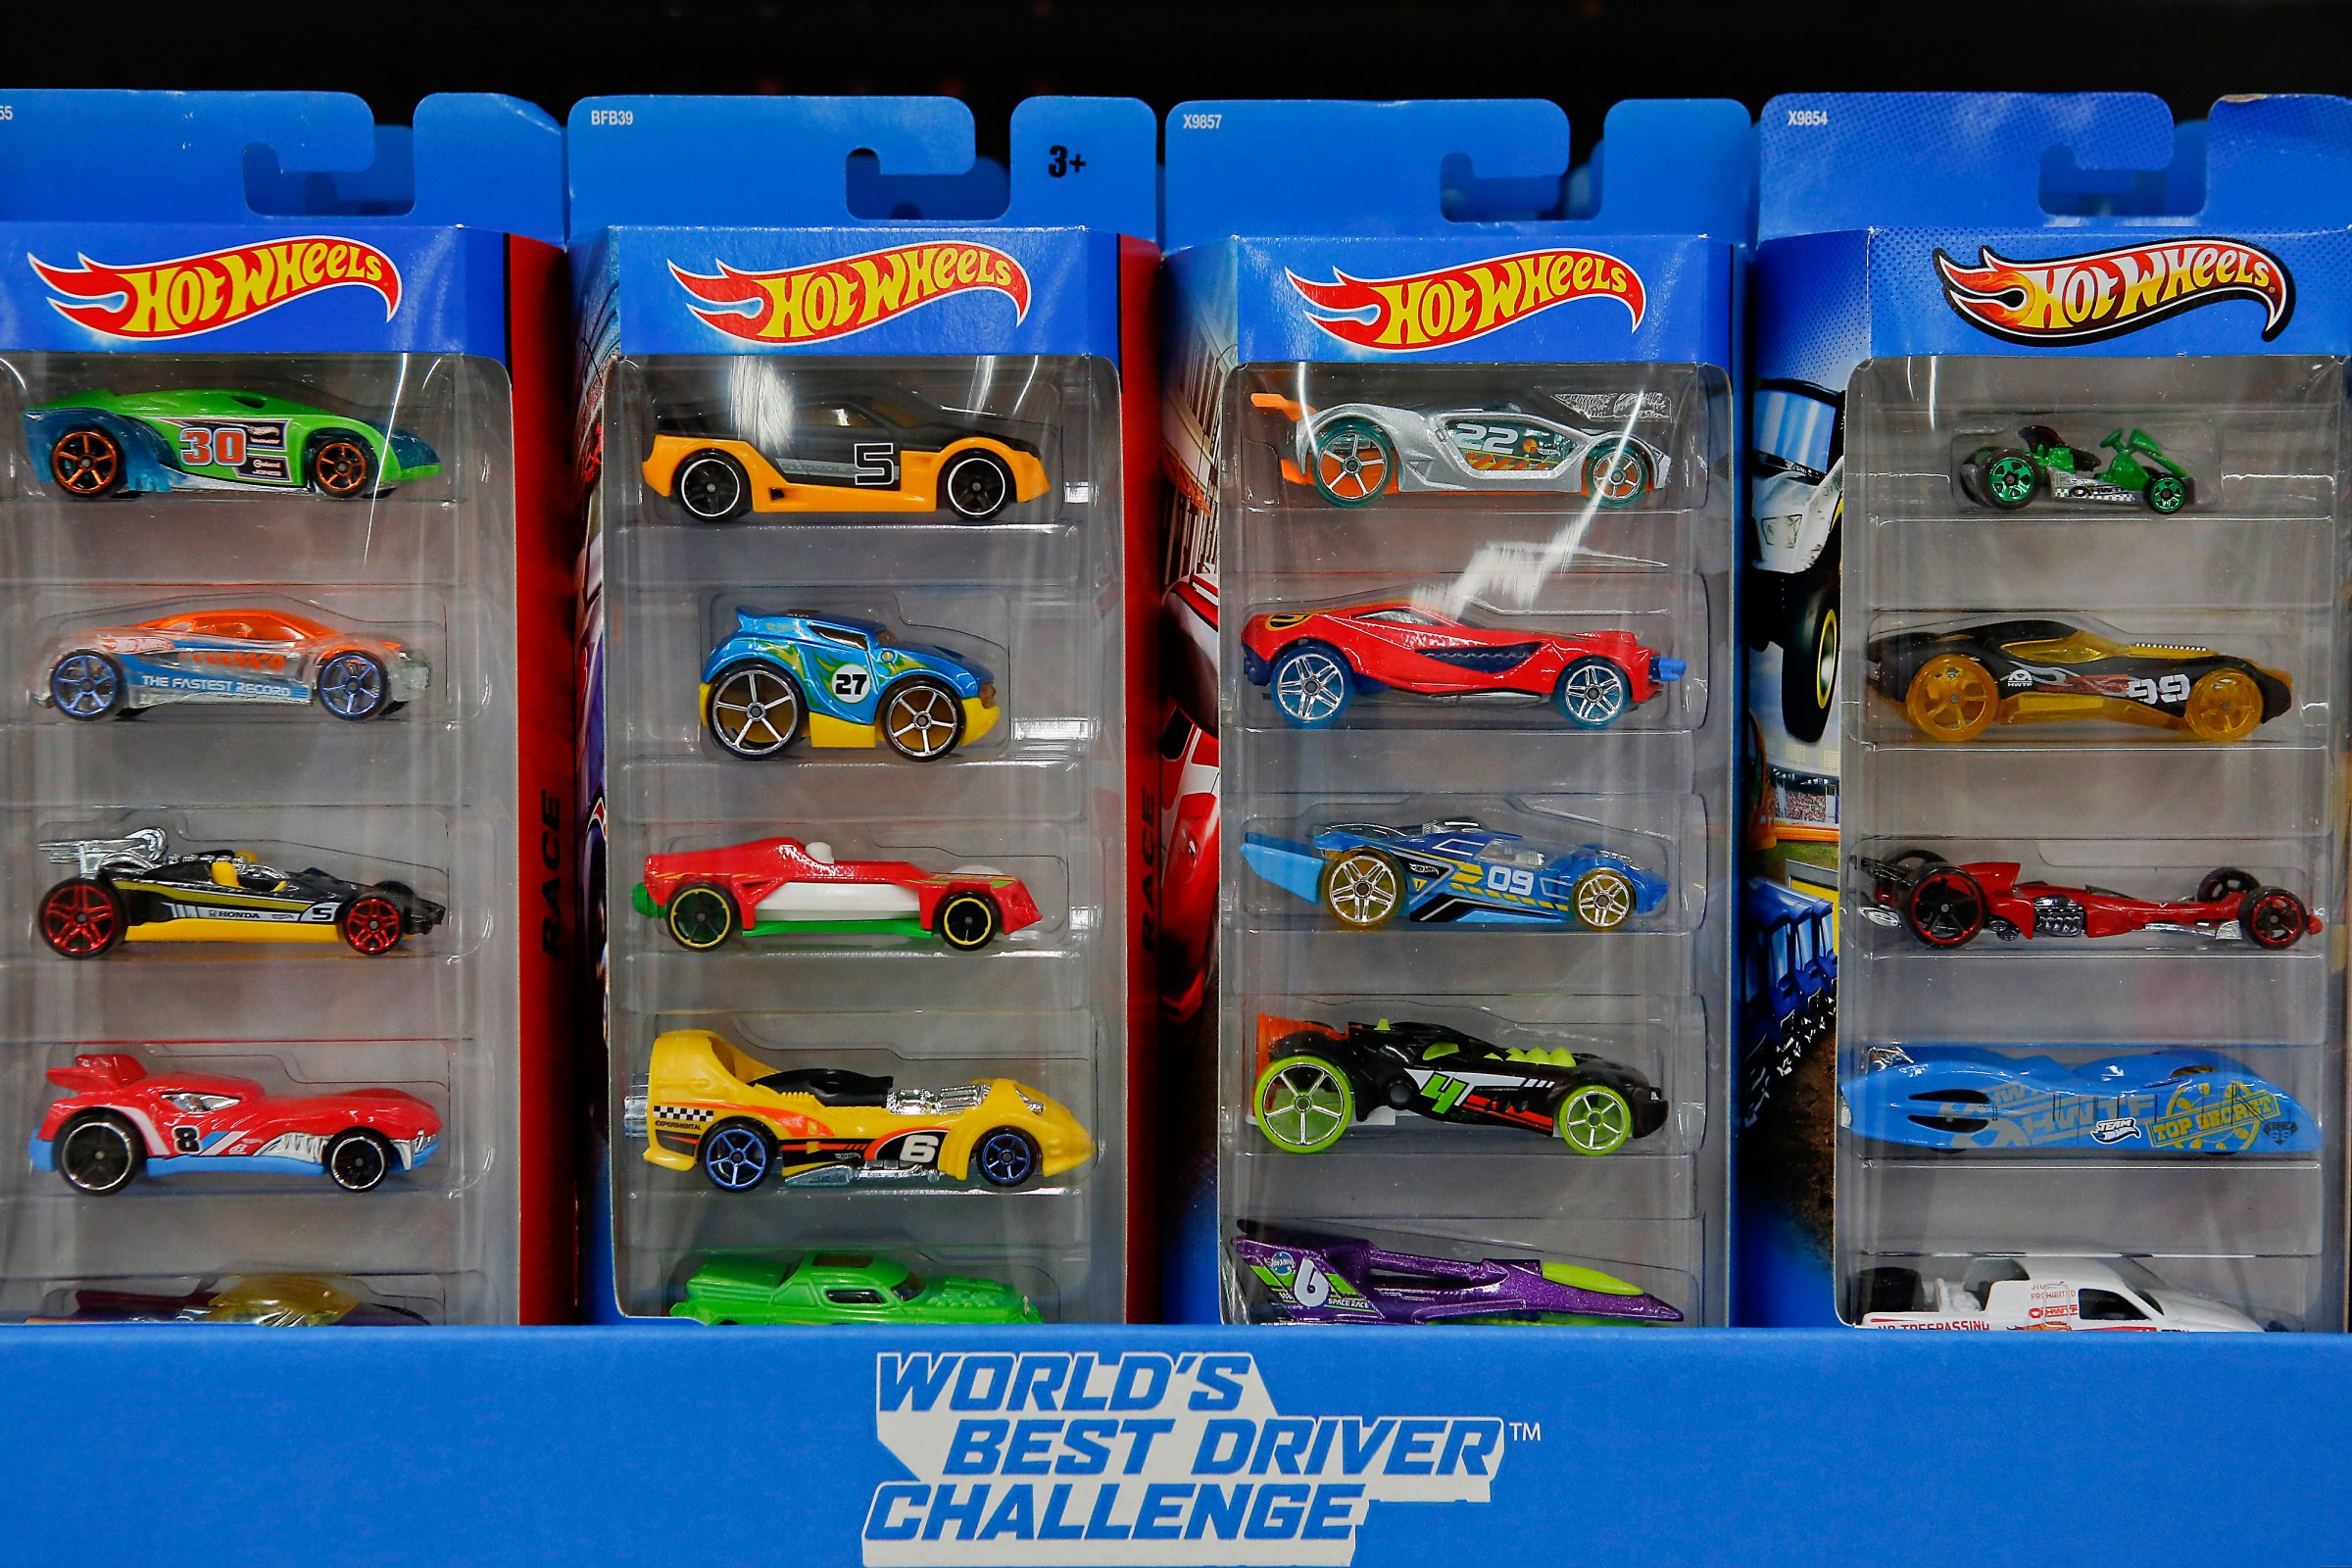 Mattel Inc. Hot Wheels cars are displayed for sale at a Wal-Mart Stores Inc. location ahead of Black Friday in Los Angeles, California, U.S., on Tuesday, Nov. 26, 2013.